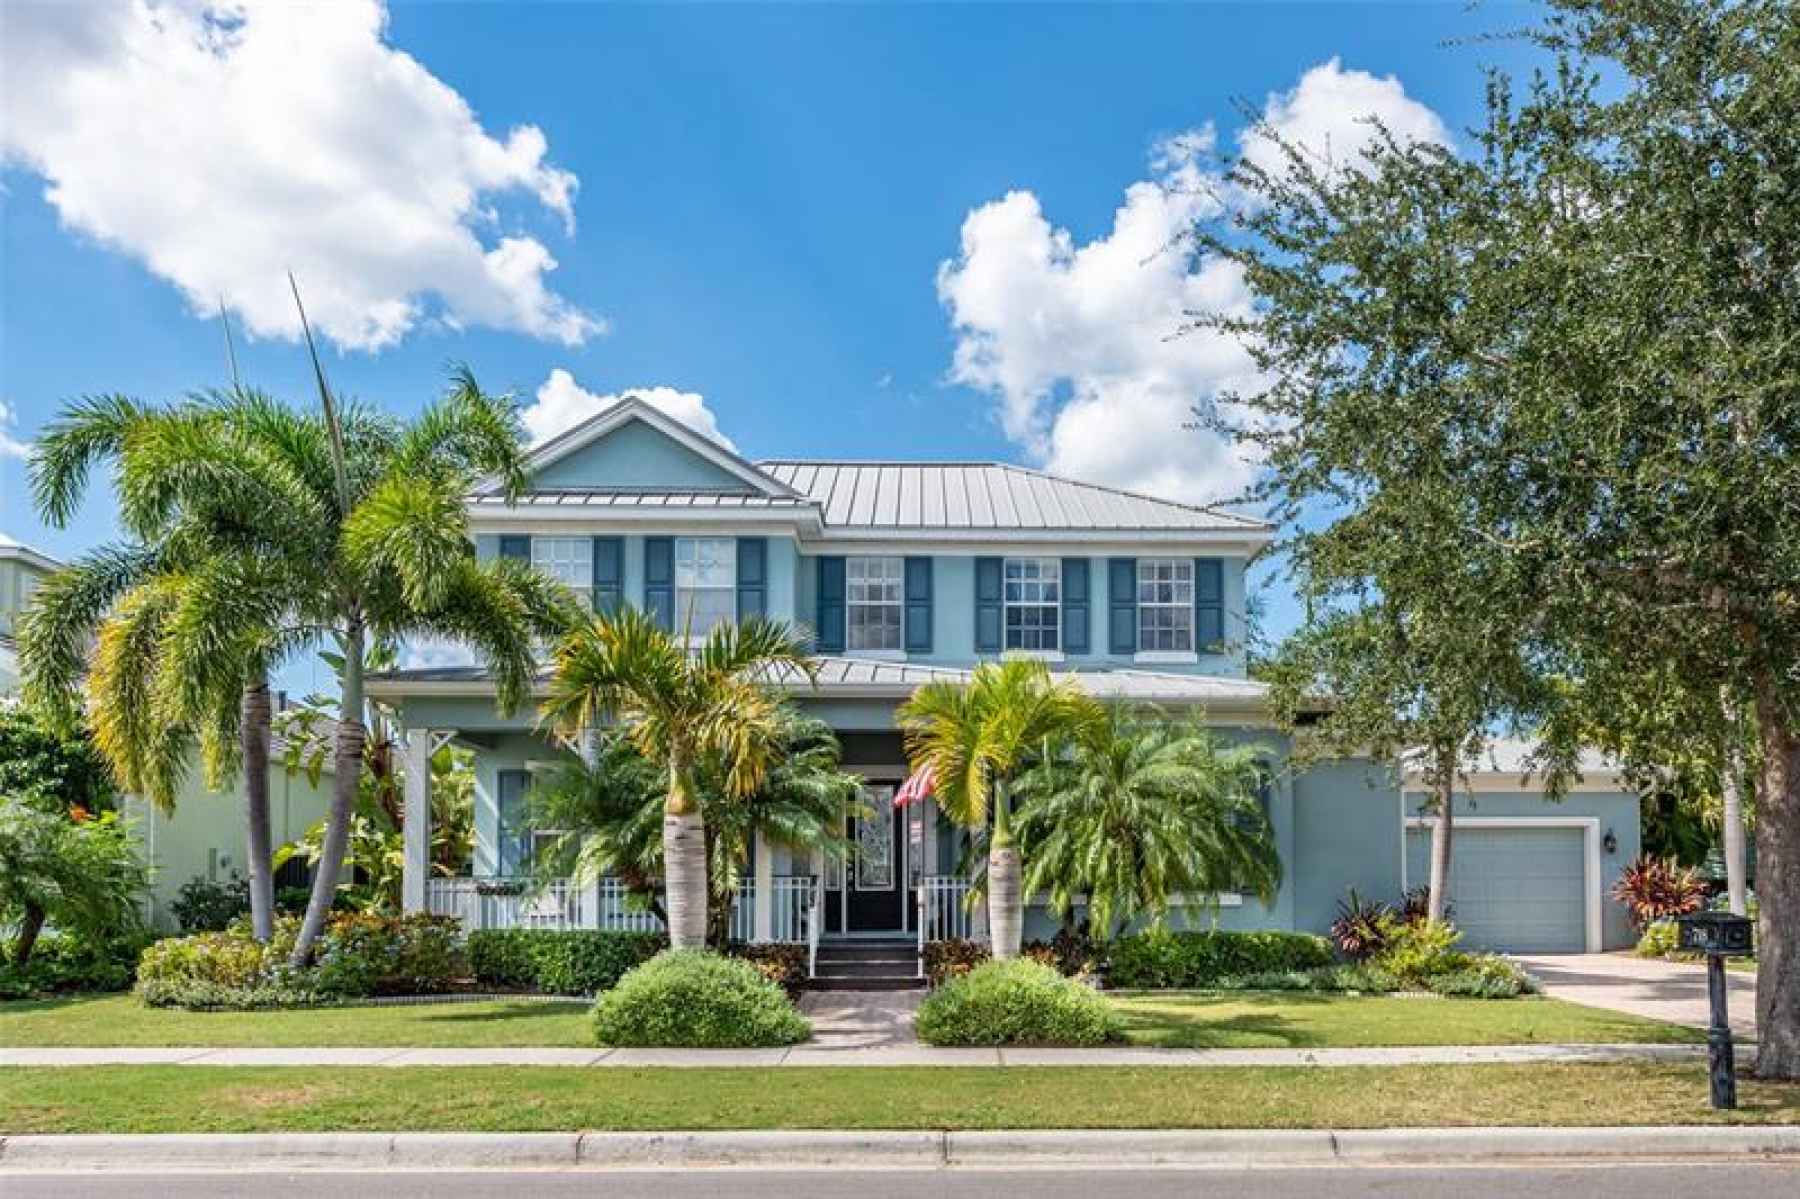 Coastal living at its best. Located in the heart of Apollo Beach in the beautiful, amenity rich gate